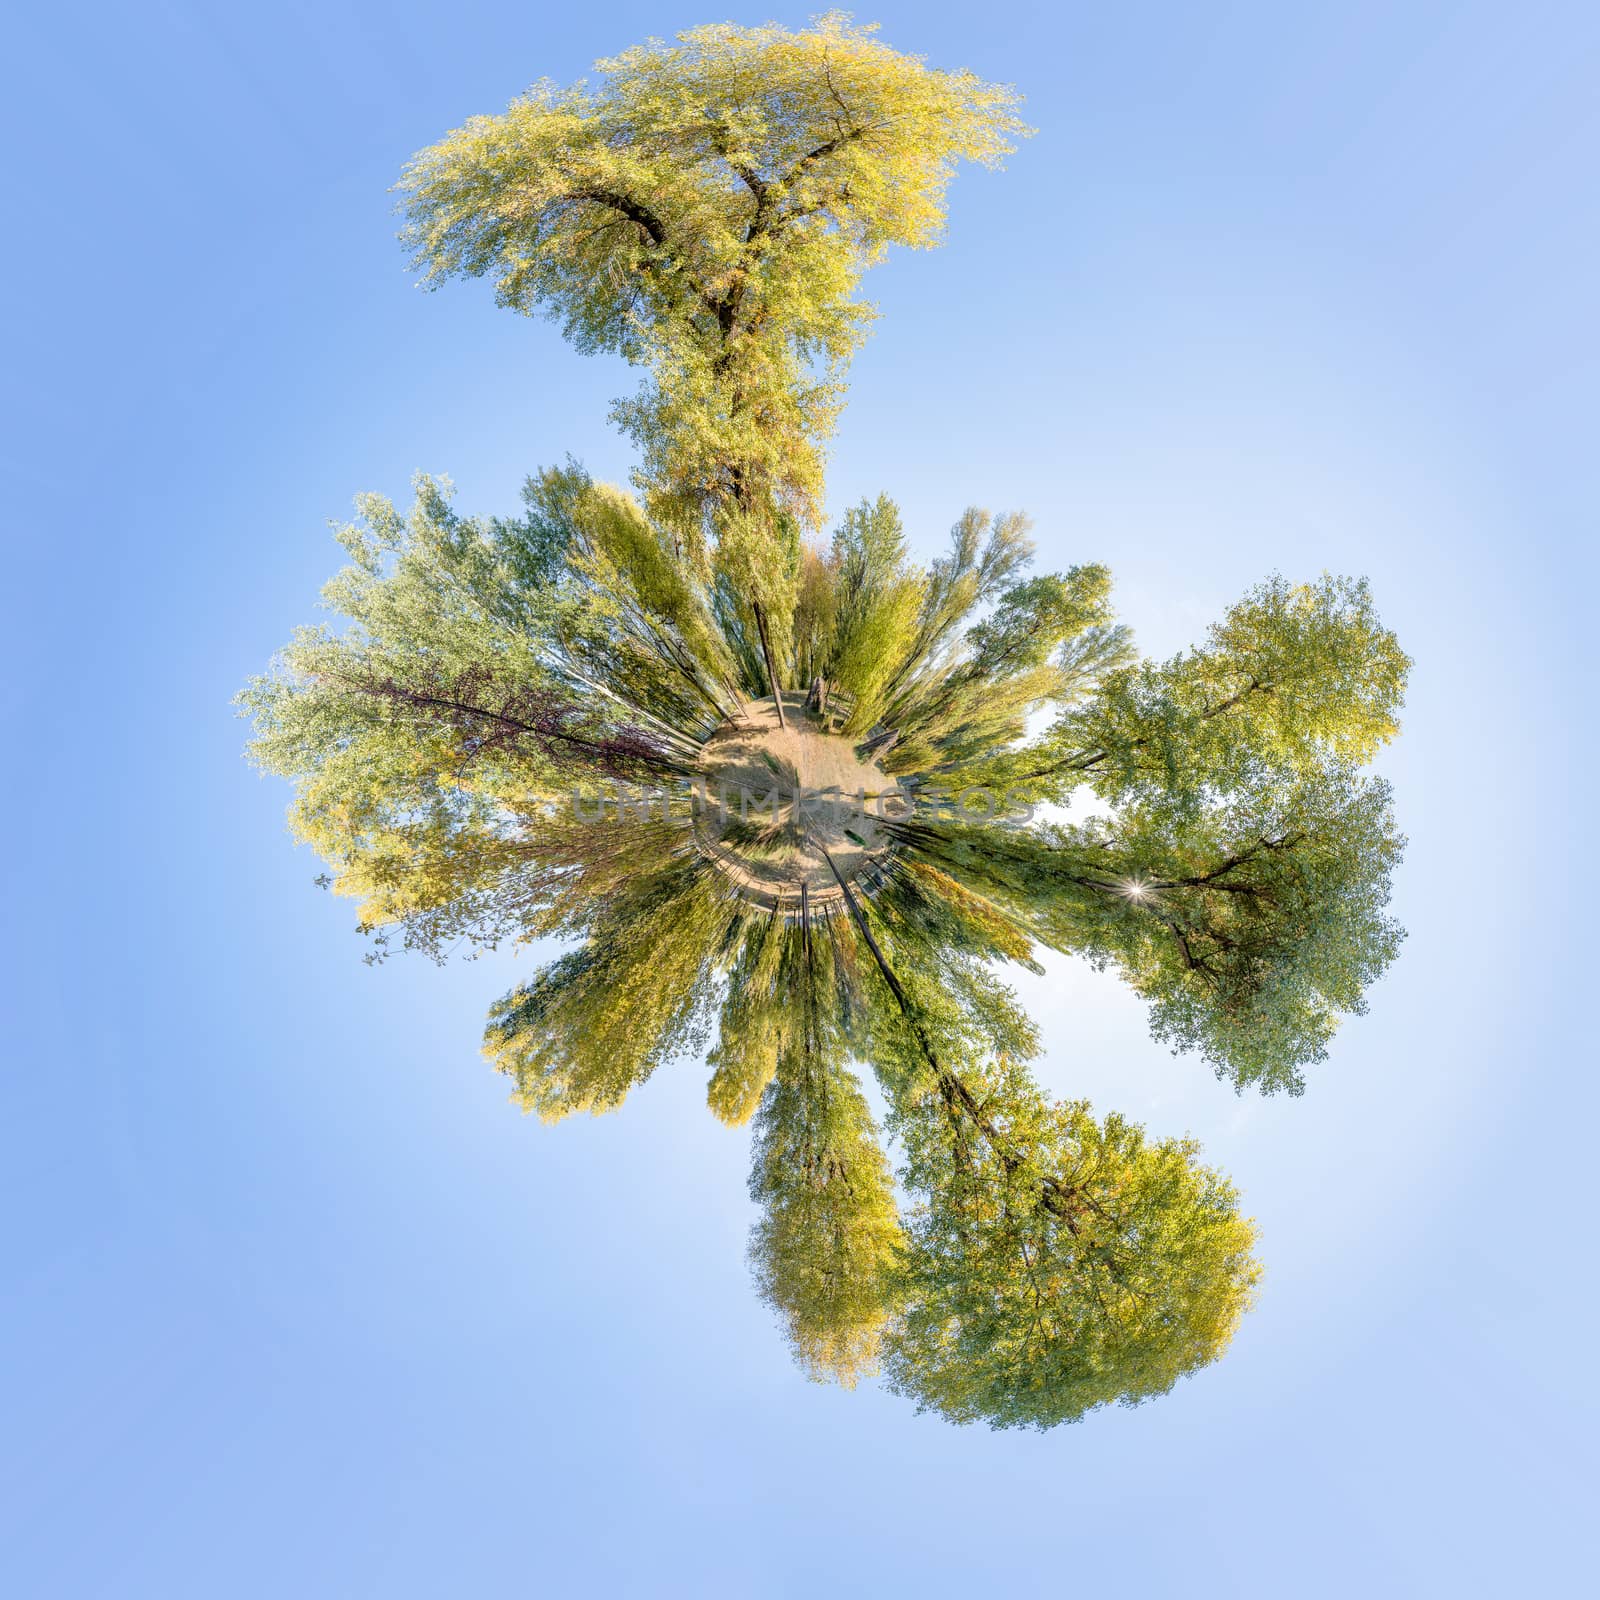 360 degree polar panorama of various trees and bushes in the park during a late summer afternoon. Soft white clouds flow in the blue sky.